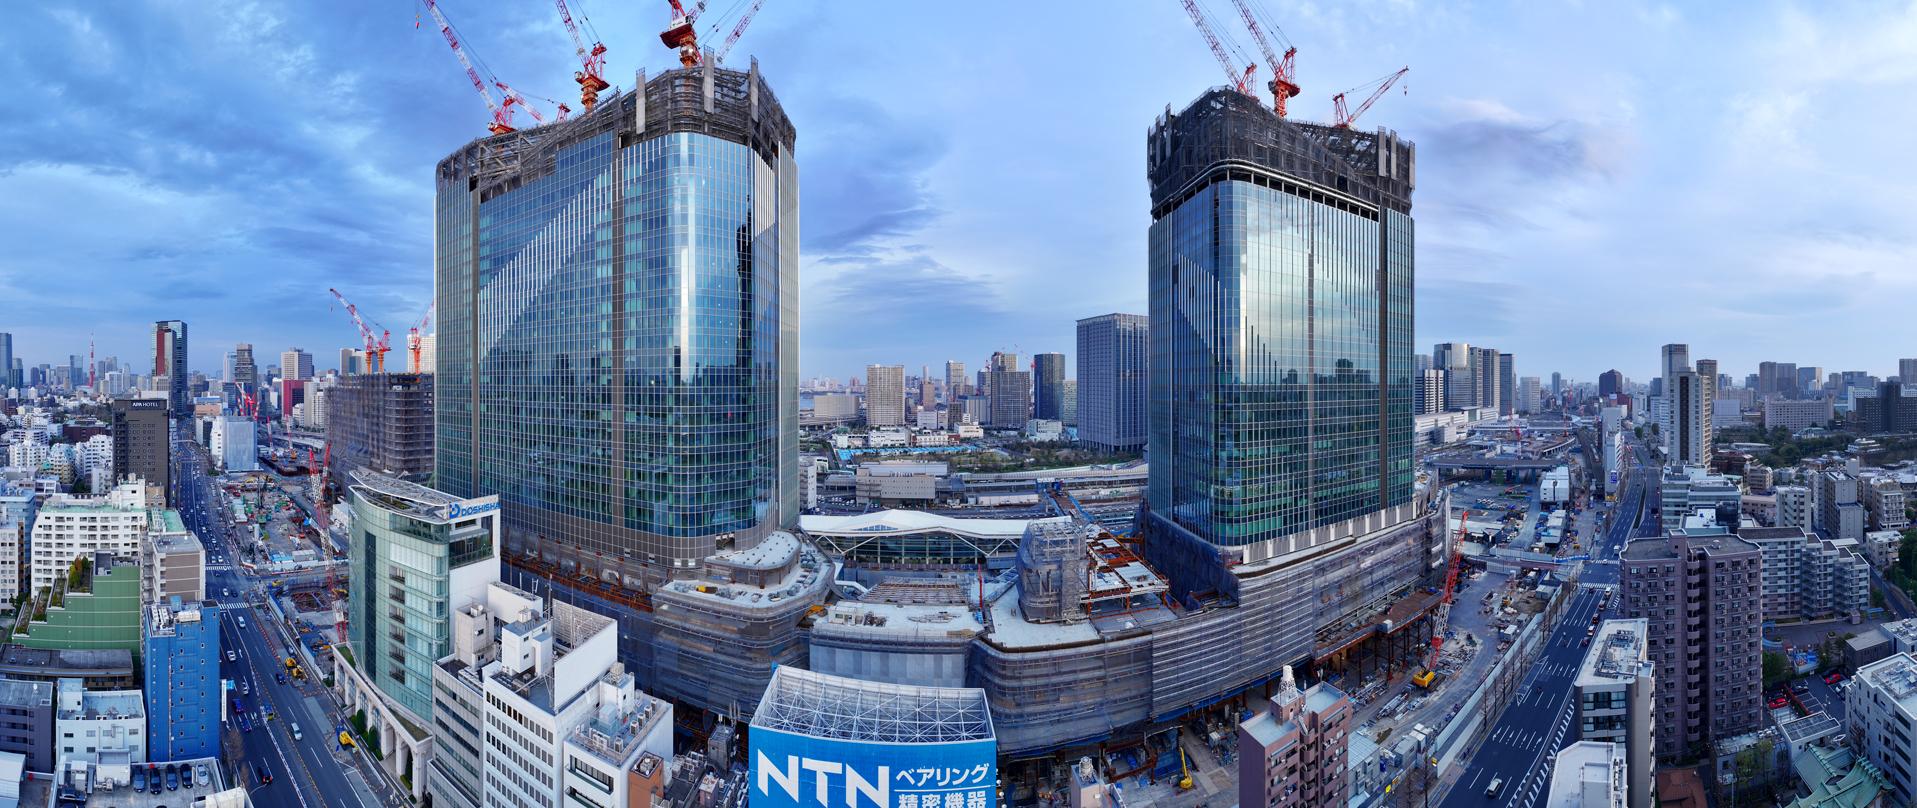 The drone view of the construction for Takanawa Gateway City, the redevelopment of the northern portion of Tokyo’s Shinagawa Station.